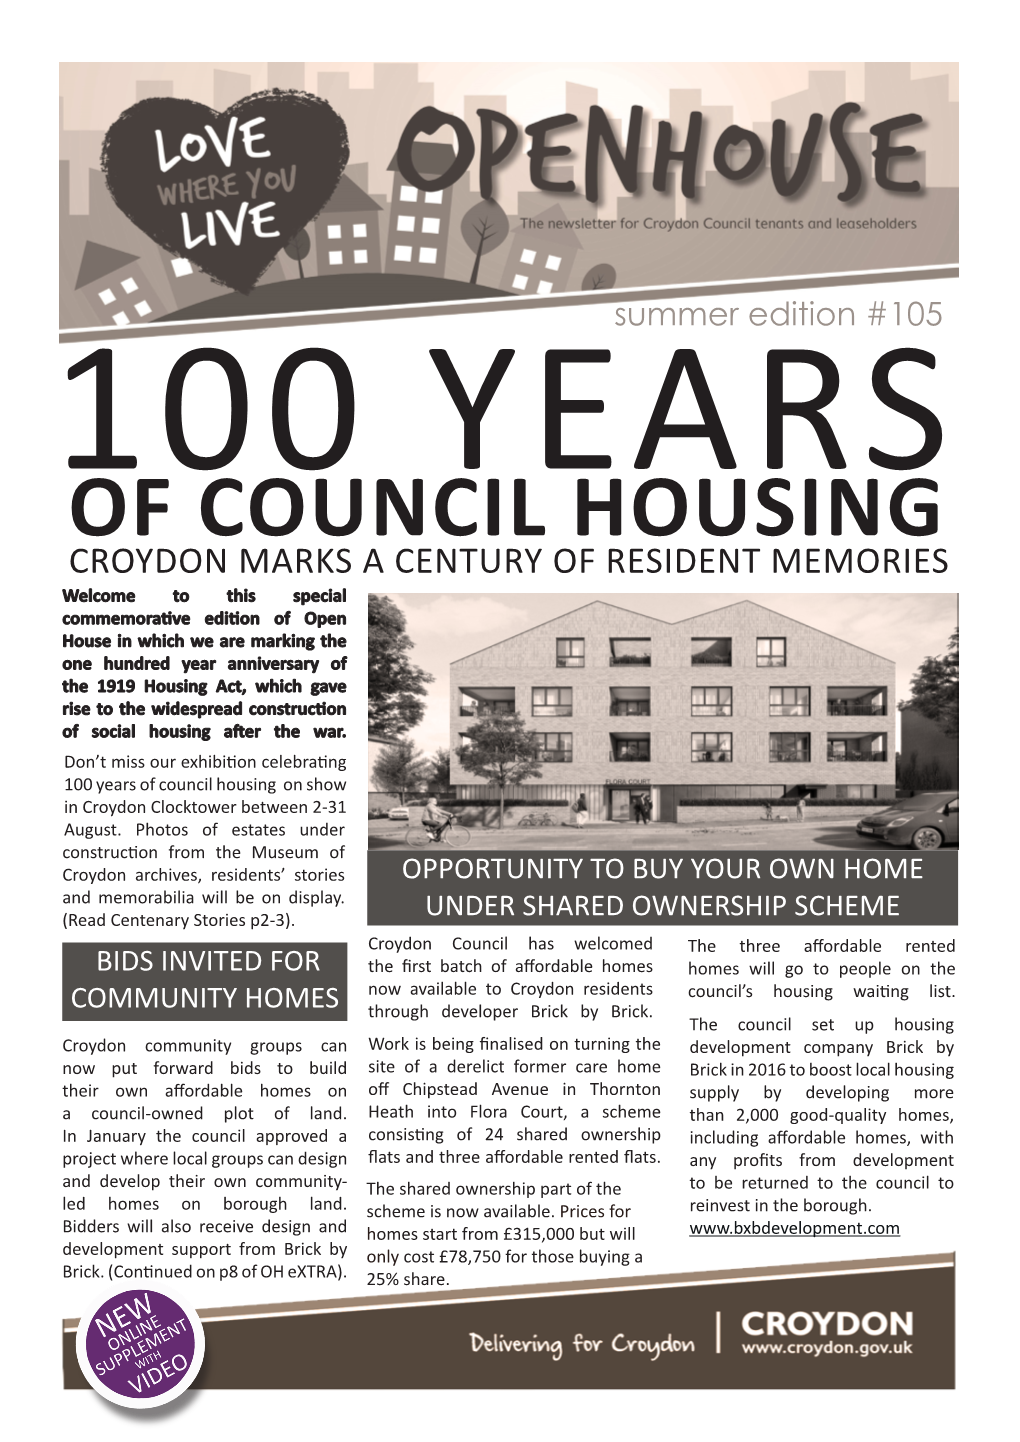 Of Council Housing on Show in Croydon Clocktower Between 2-31 August